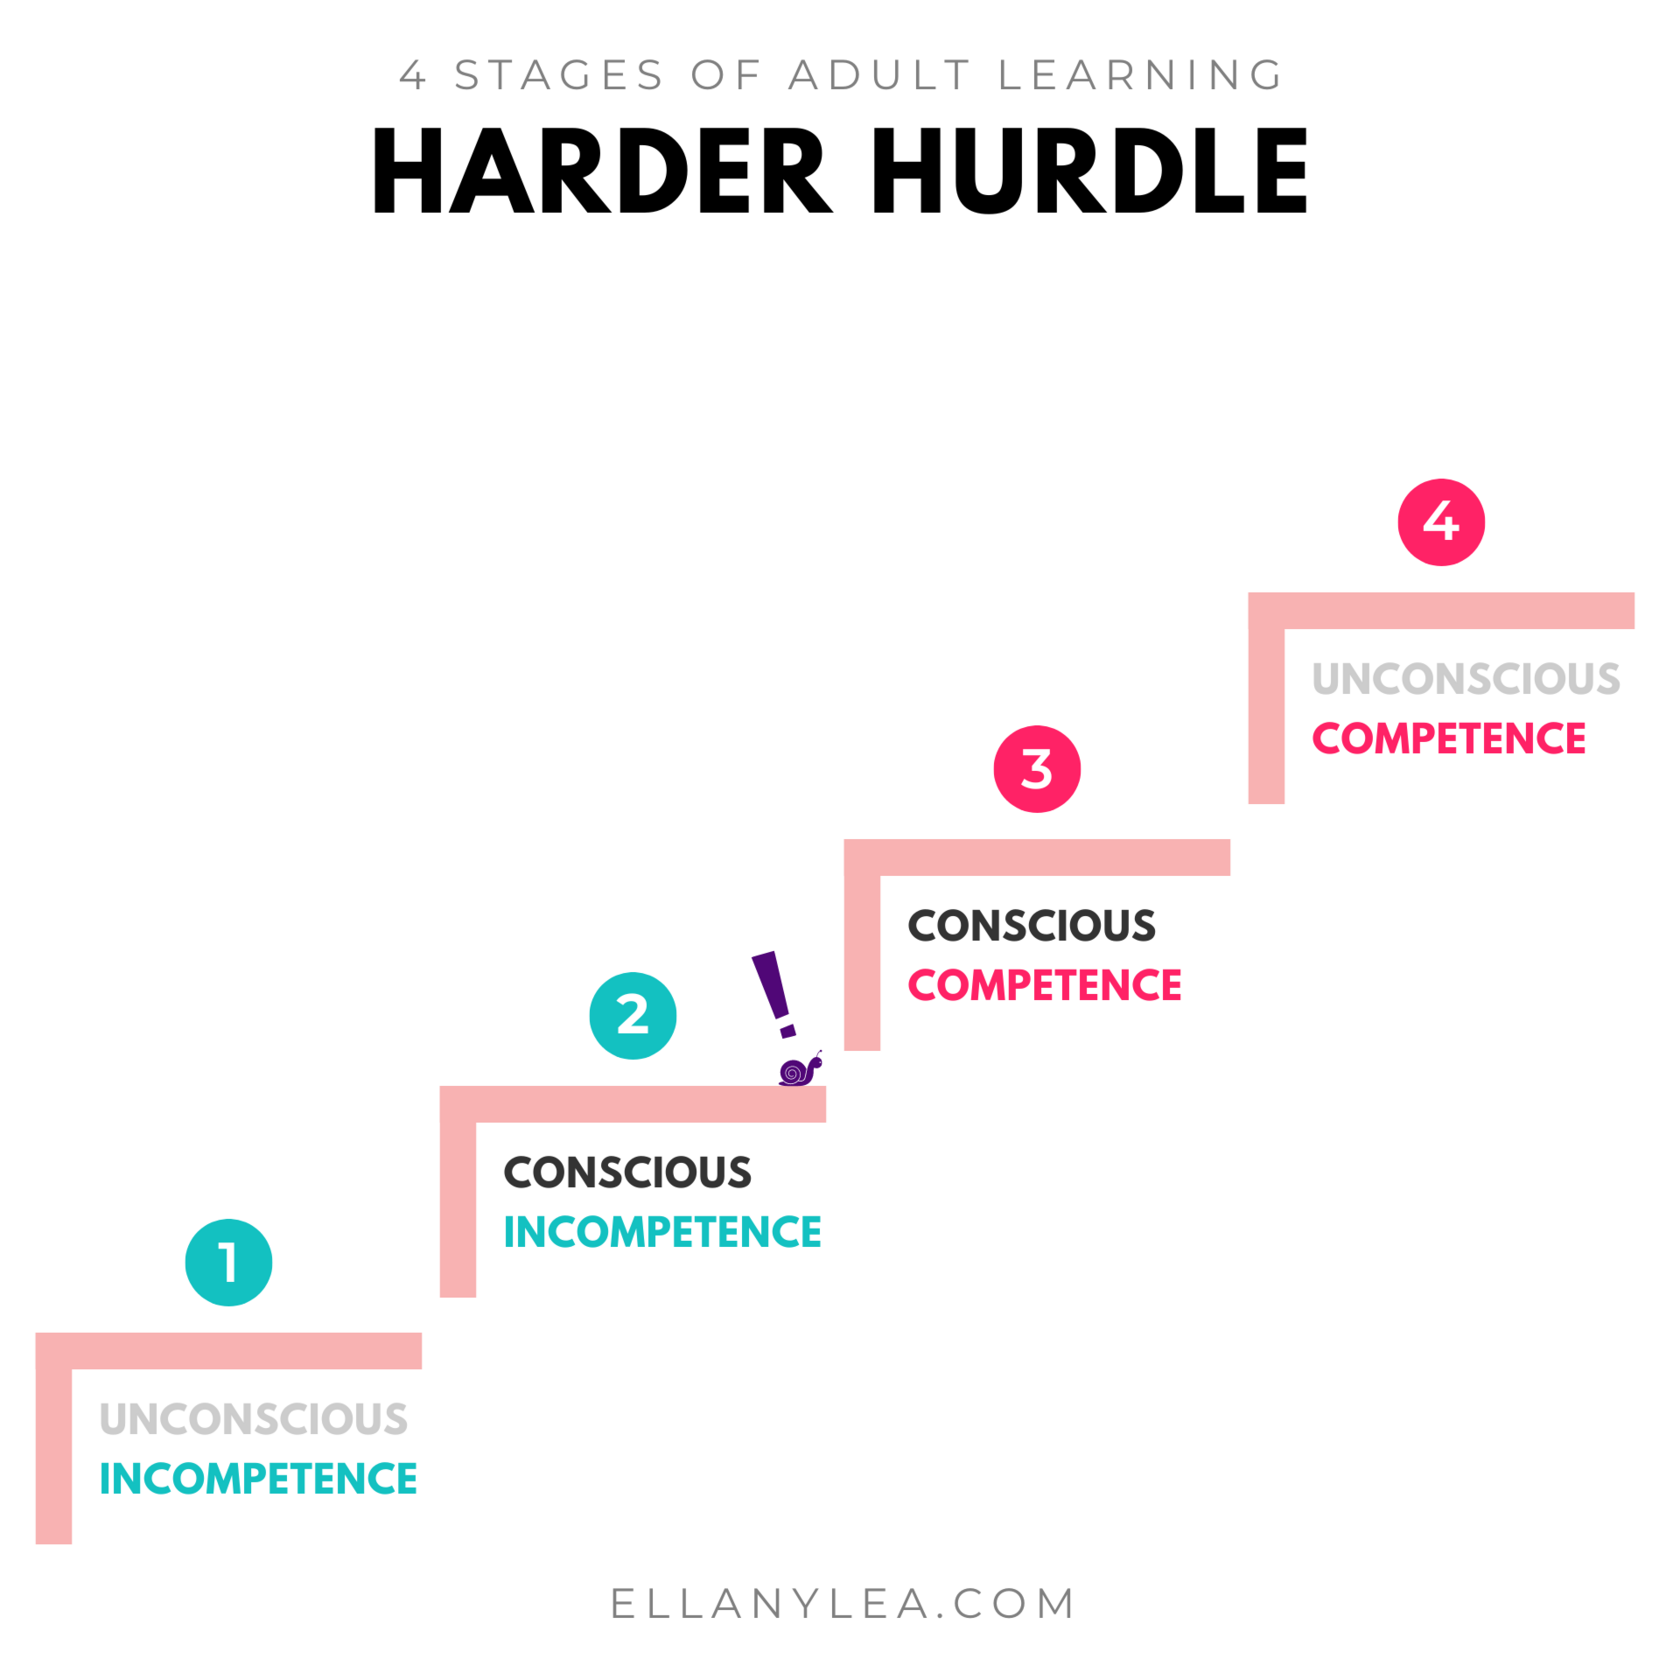 4-Stages-Adult-Learning-Hurdle-Harder